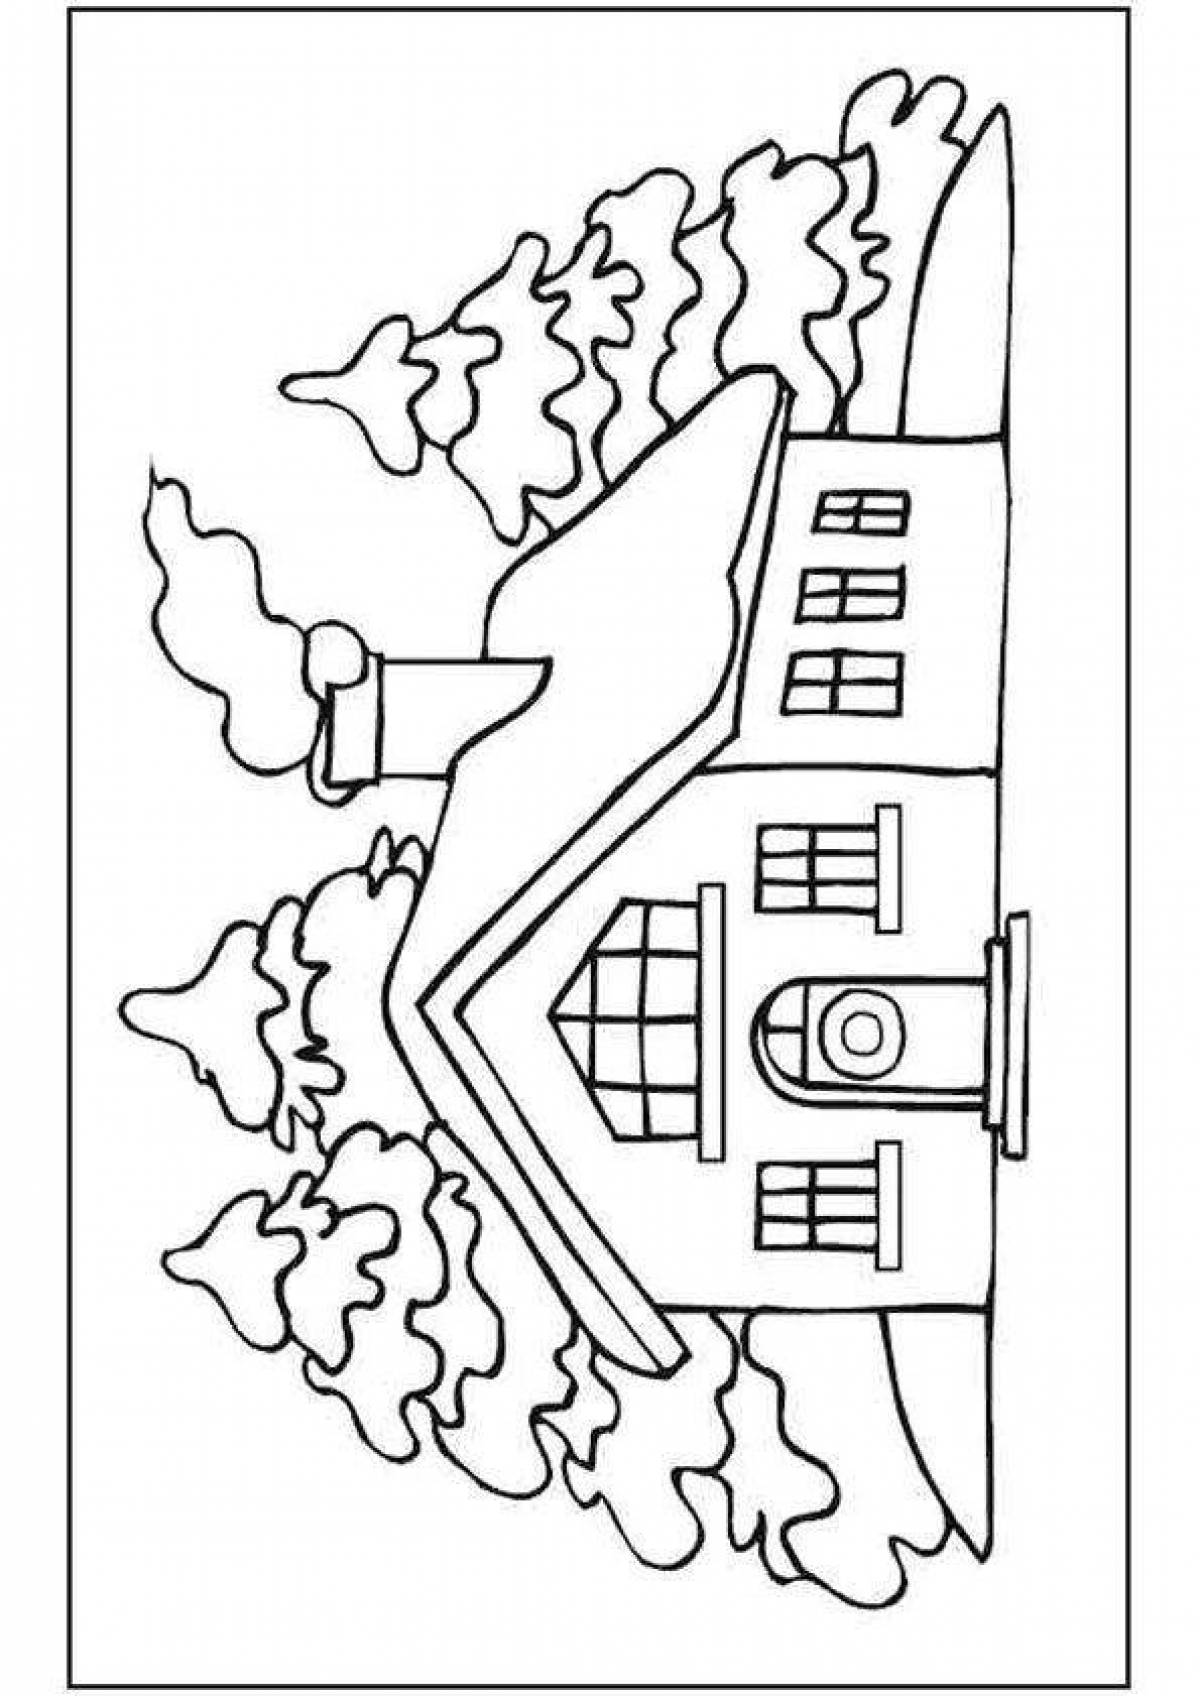 Coloring page mysterious burning house